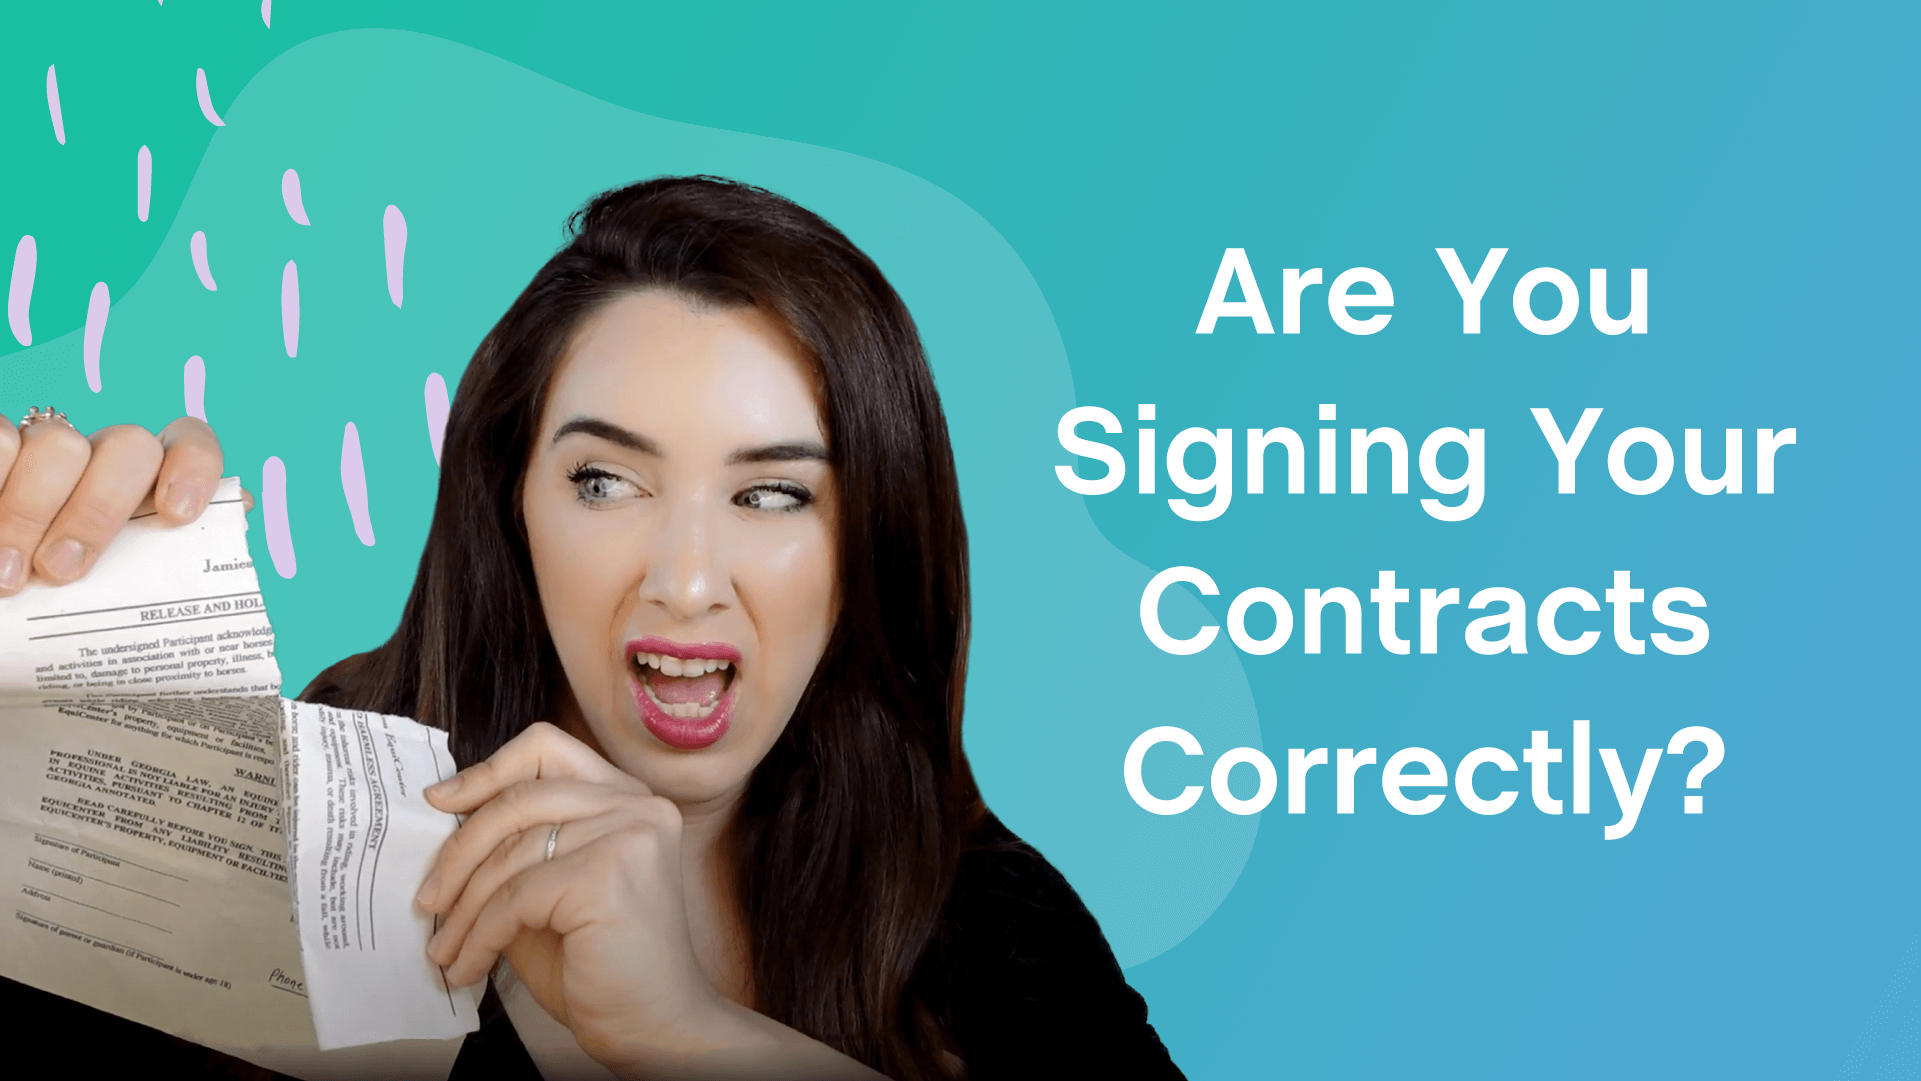 Are You Signing Your Contracts Correctly?